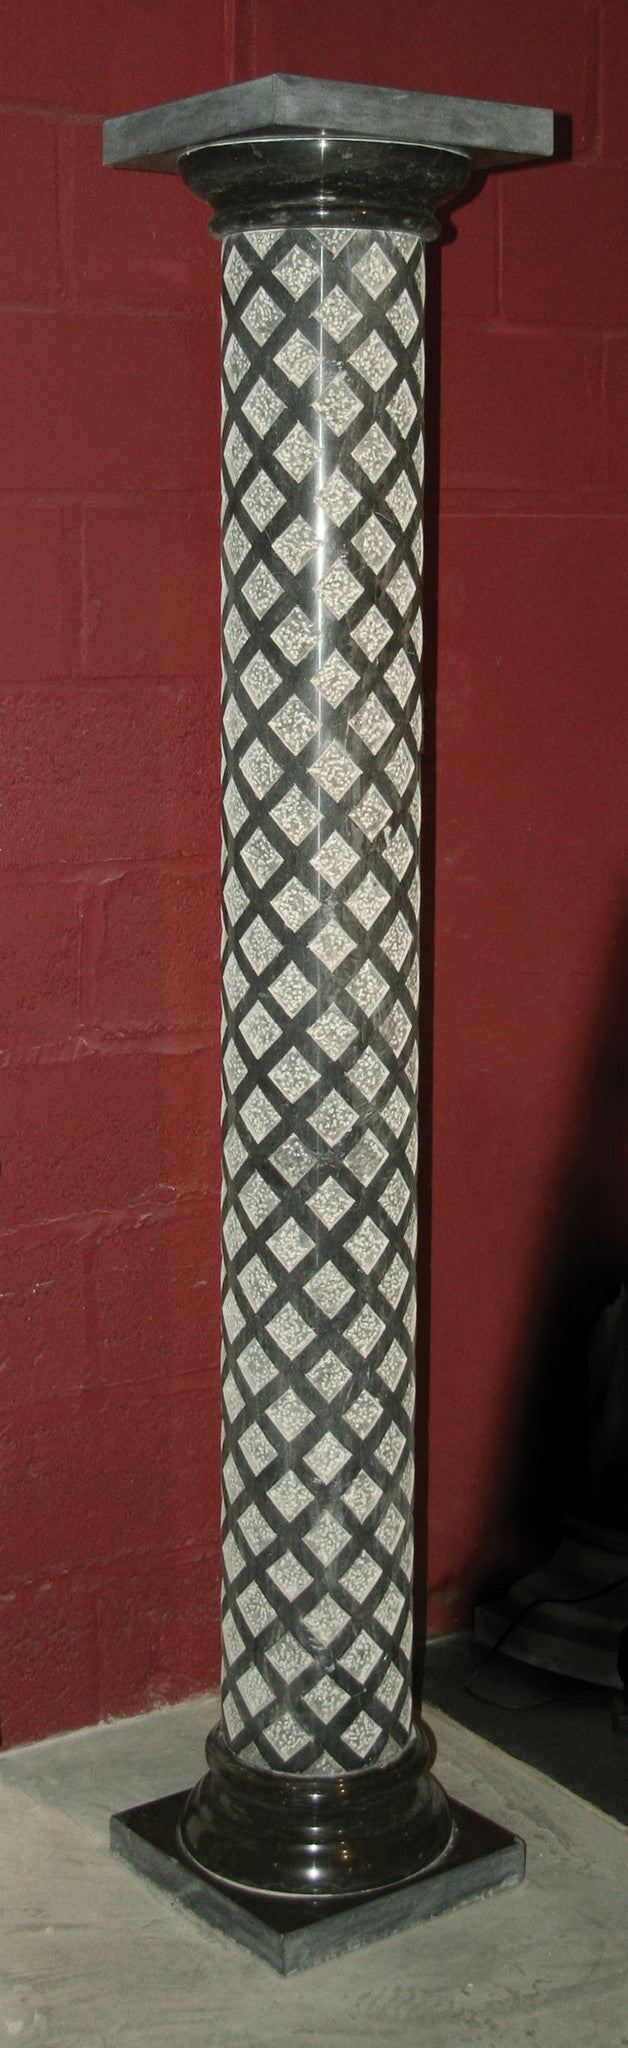 The Harlequin Column. (Charcoal Marble)